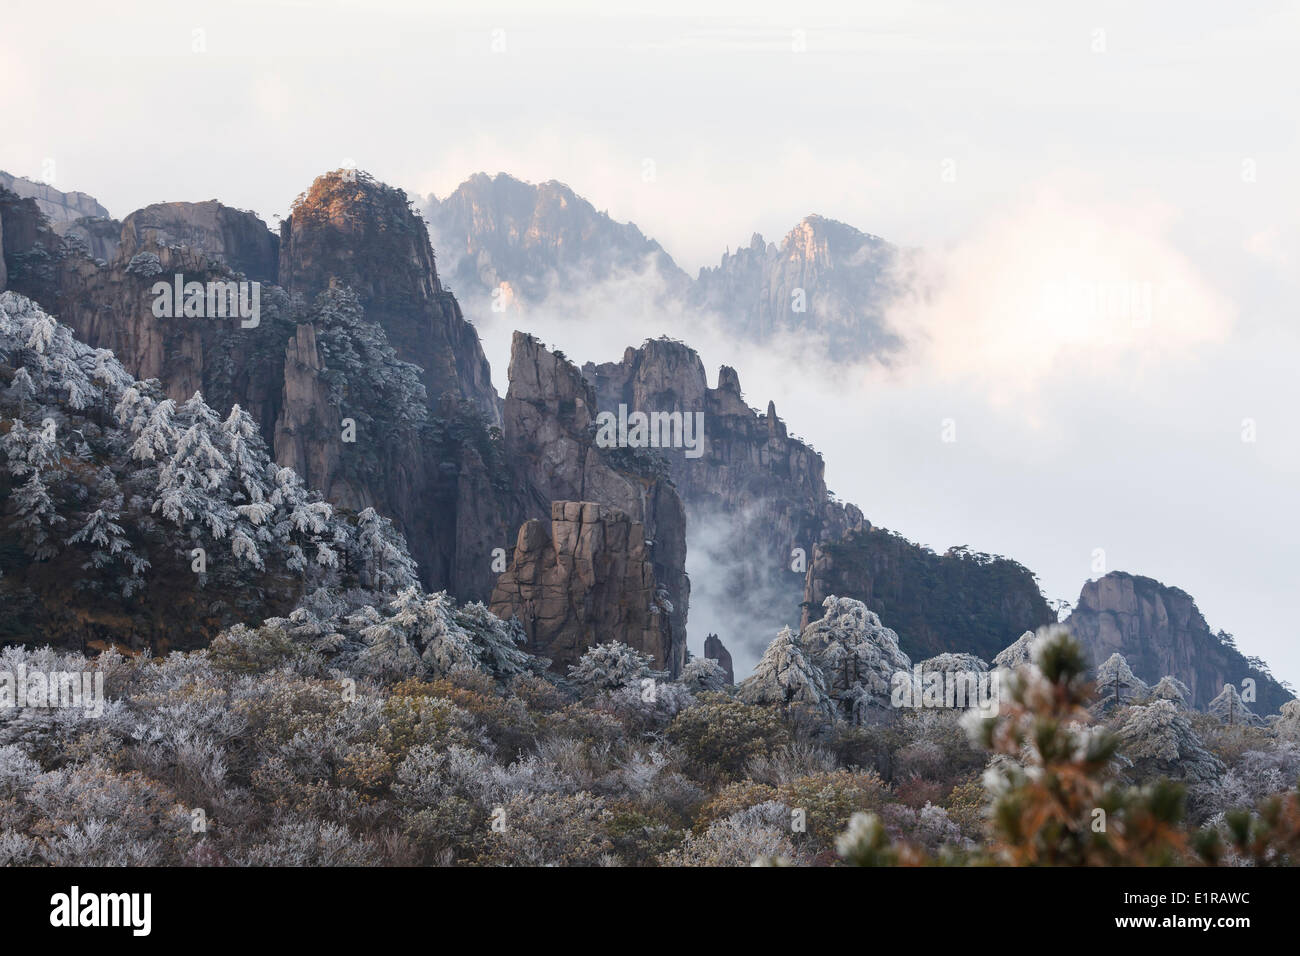 Morning light on the peaks of the Yellow mountains surrounded by clouds. Stock Photo